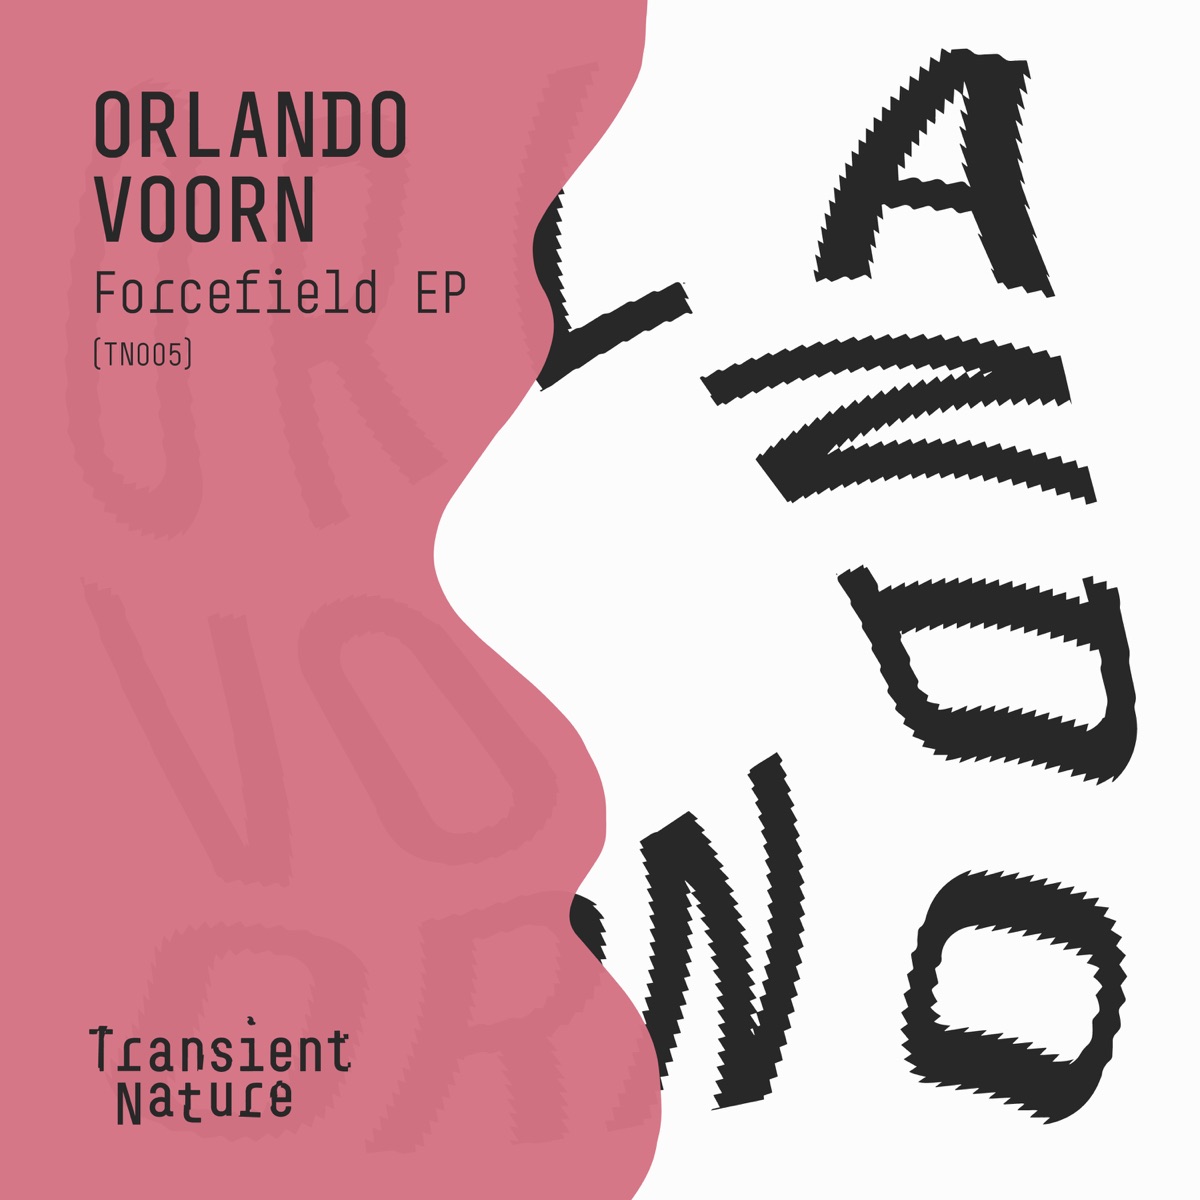 Orlando Voorn - Forcefield - EP